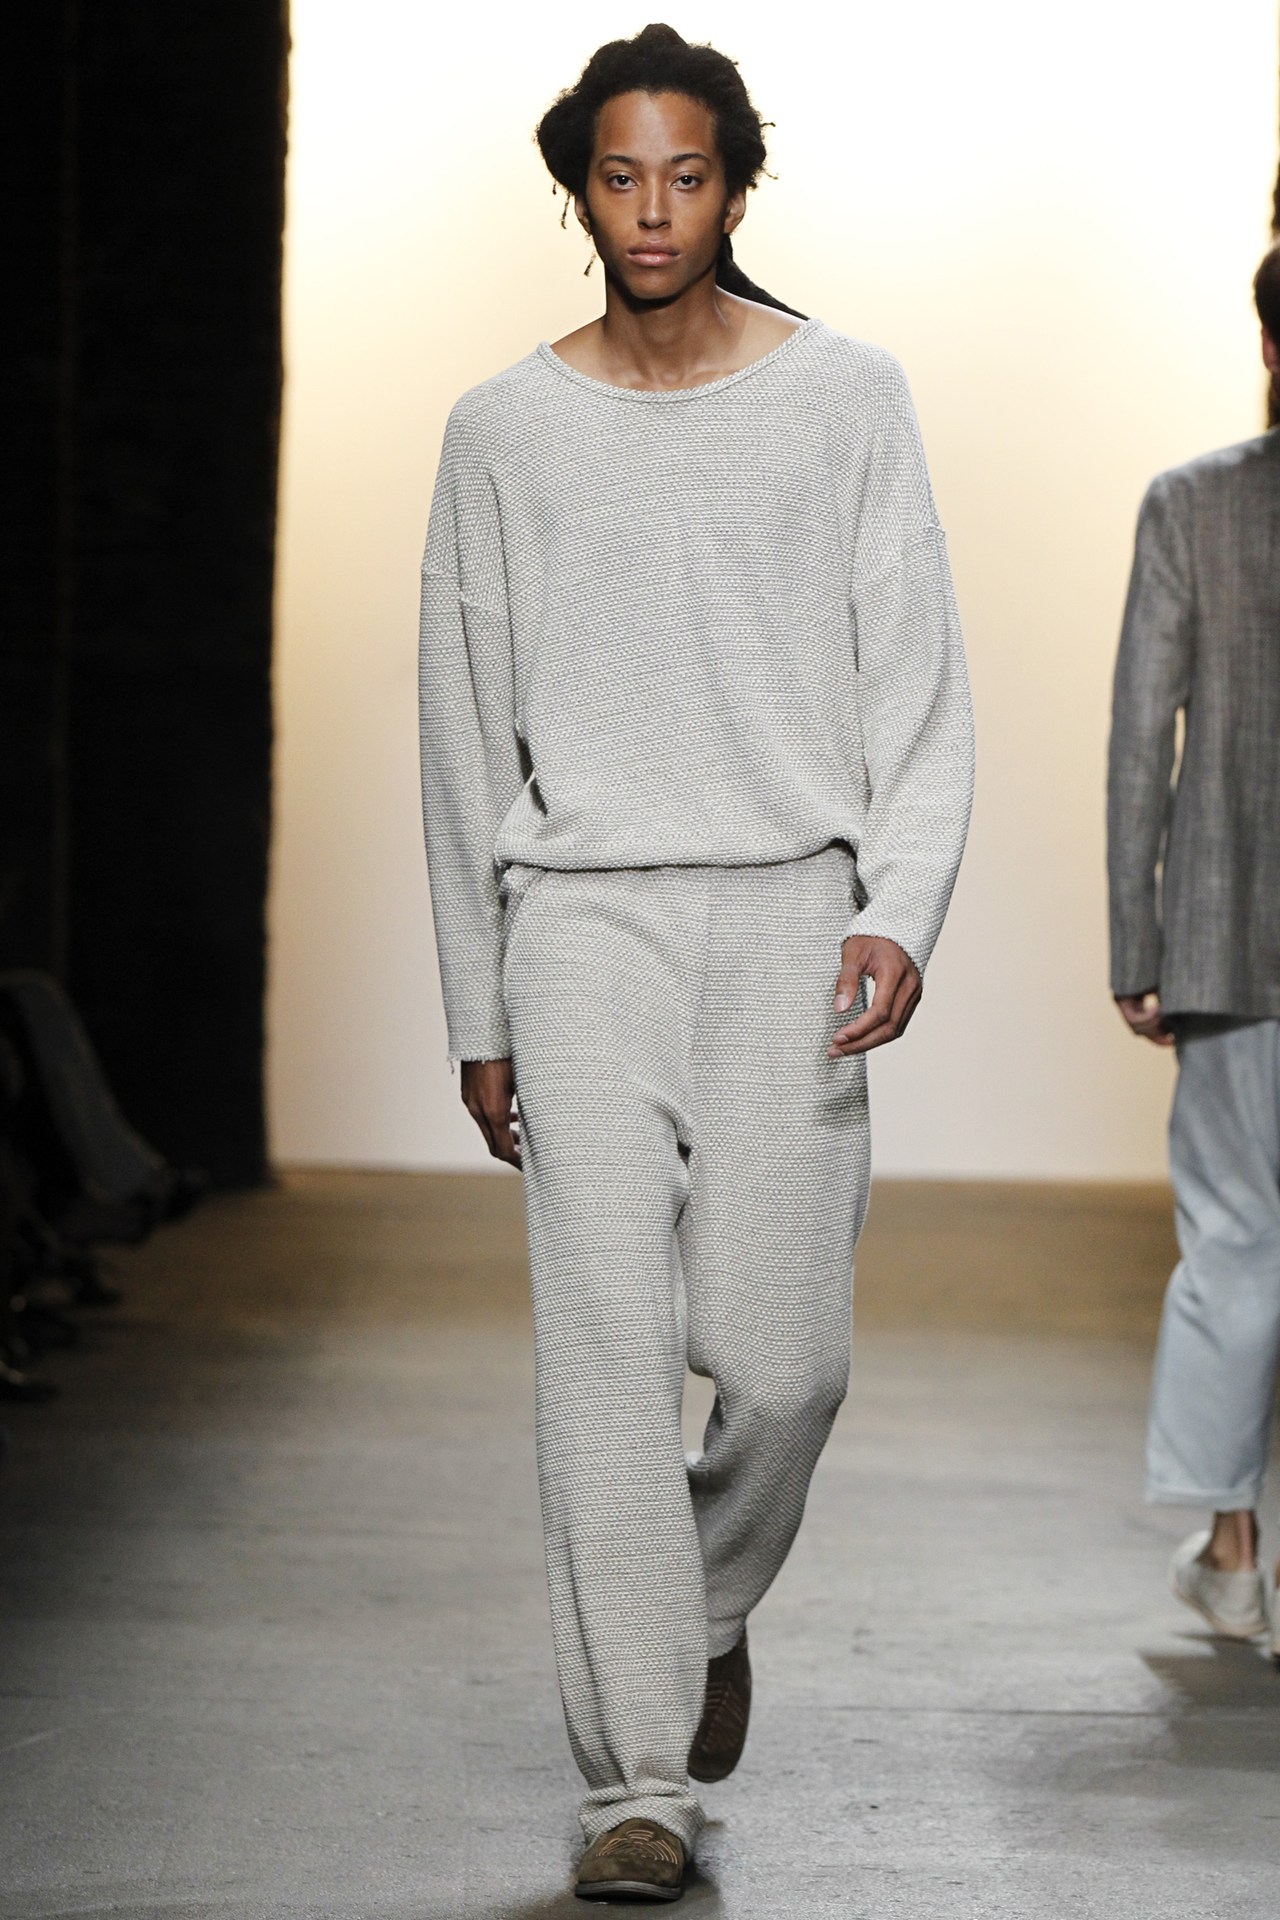 NYFW: Billy Reid Spring/Summer 2016 Collection